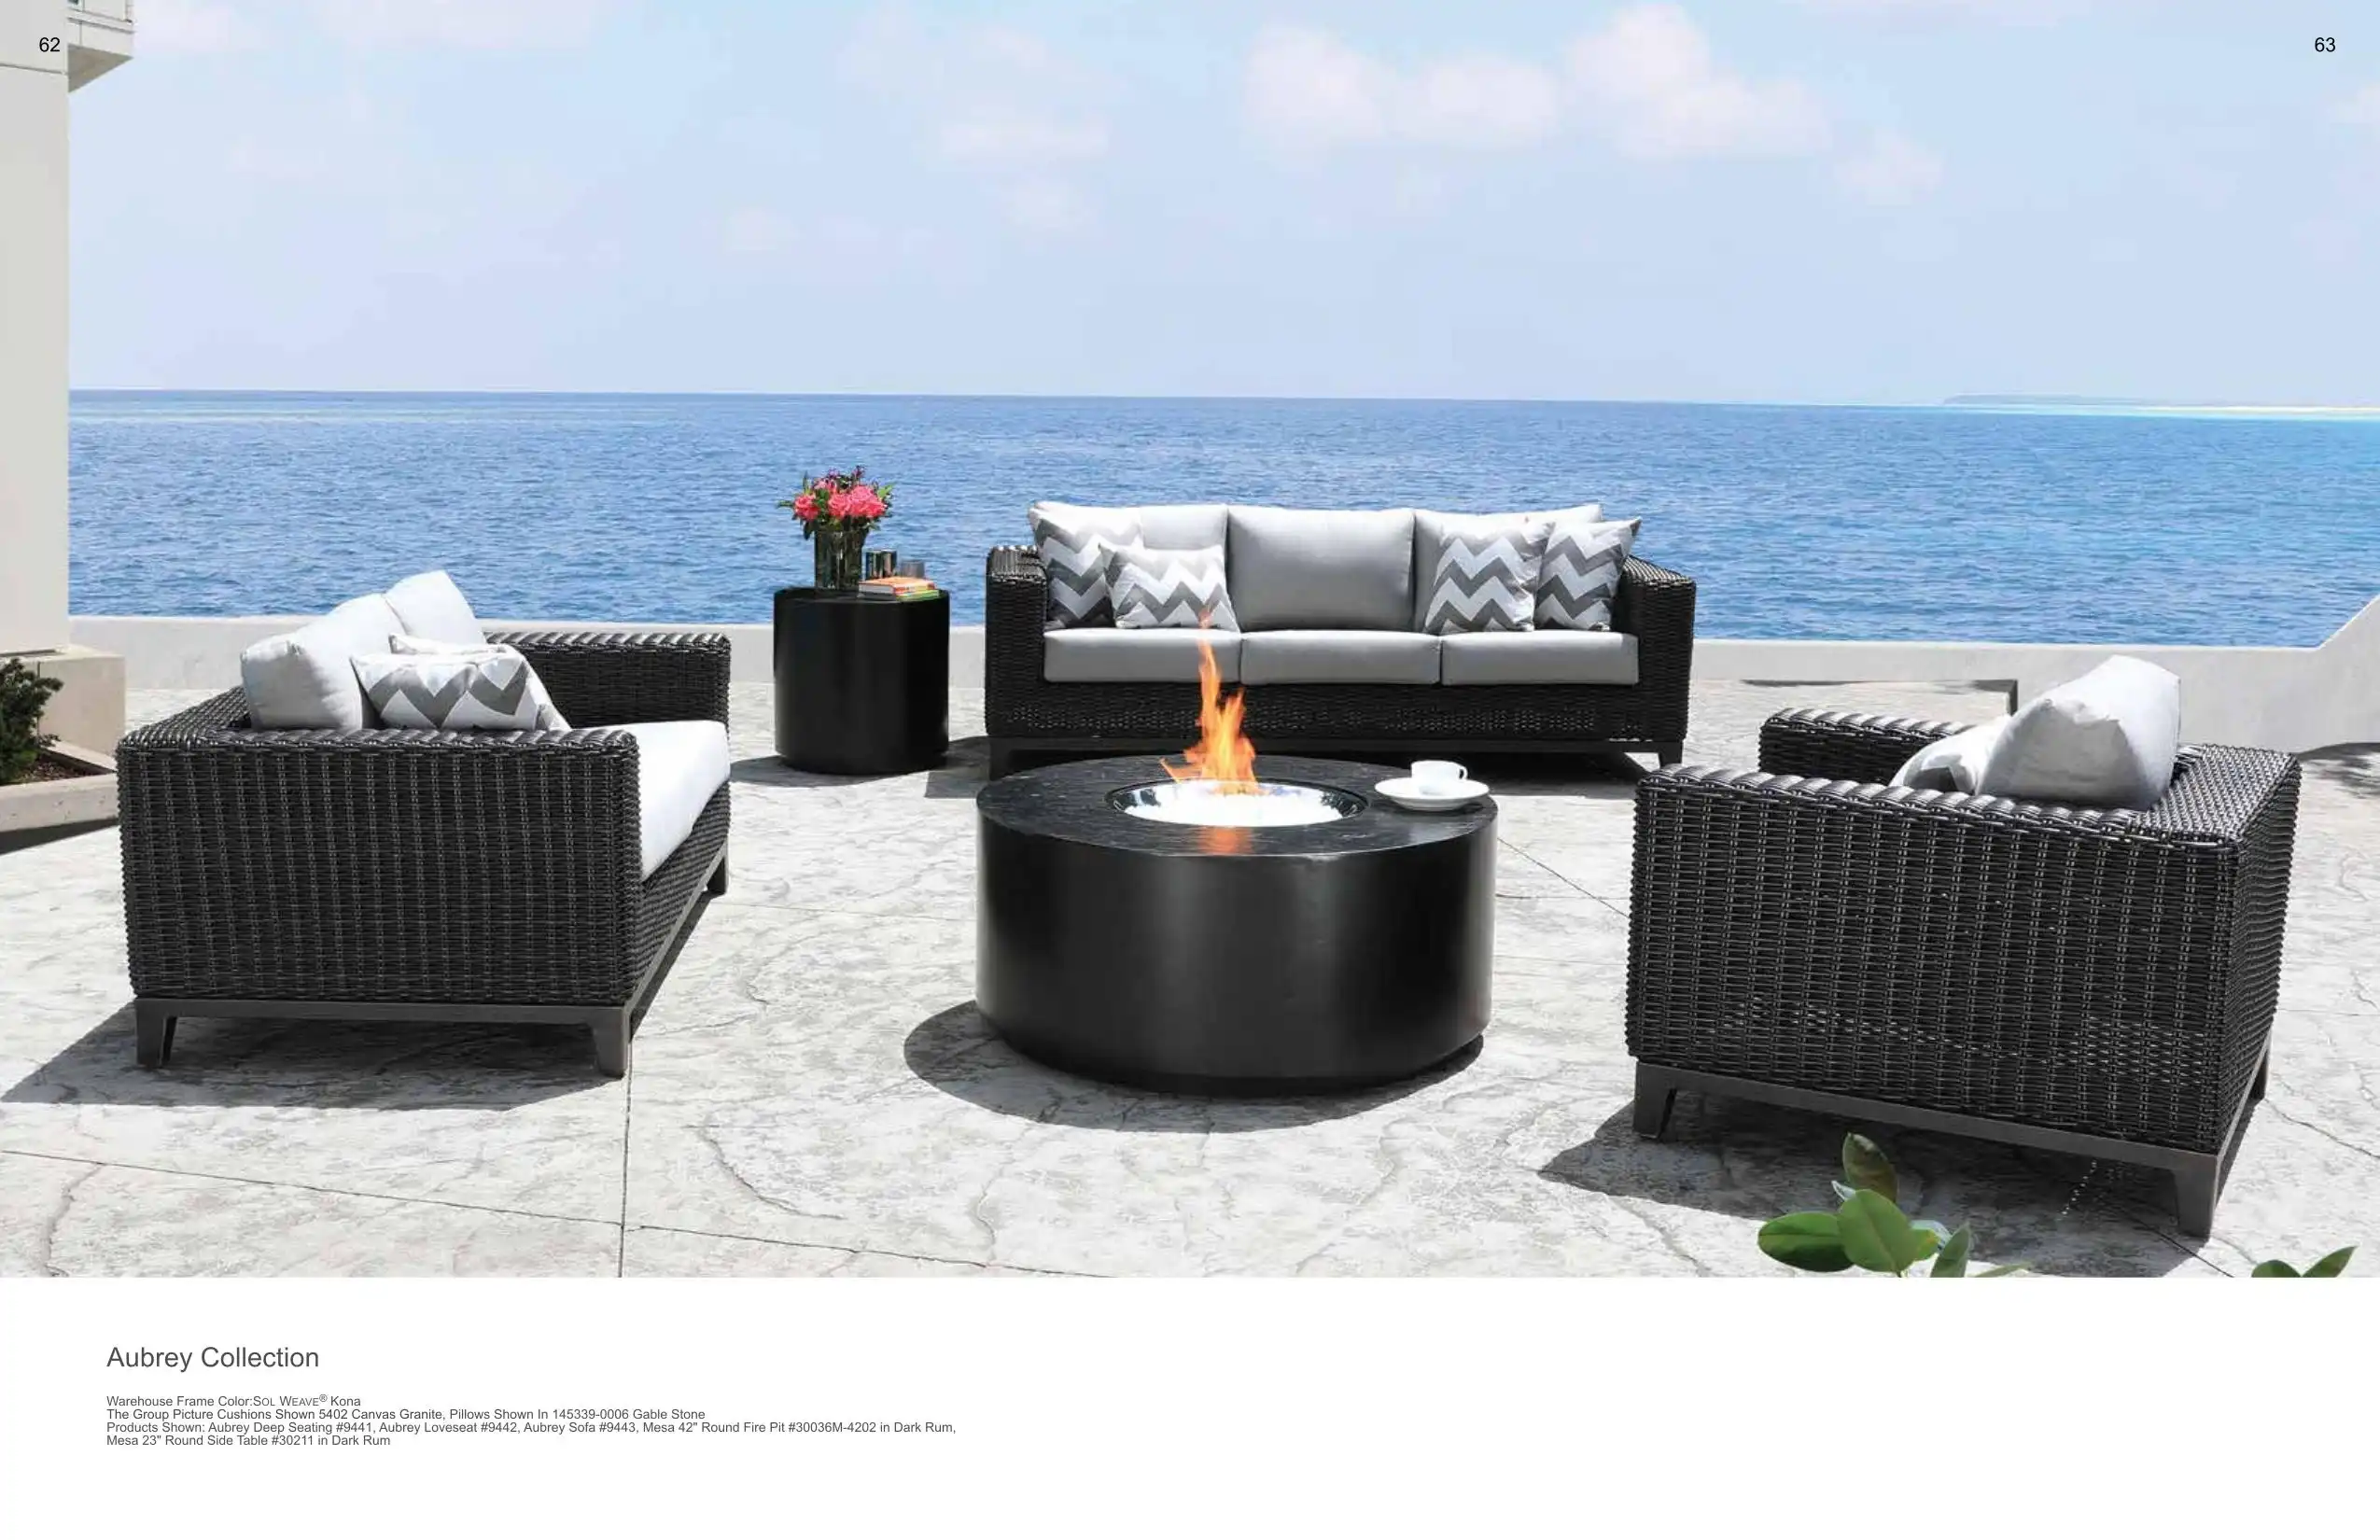 AUBREY Sofa, Loveseat & Lounge Chair (WICKER) Collection(s) by Cabana Coast